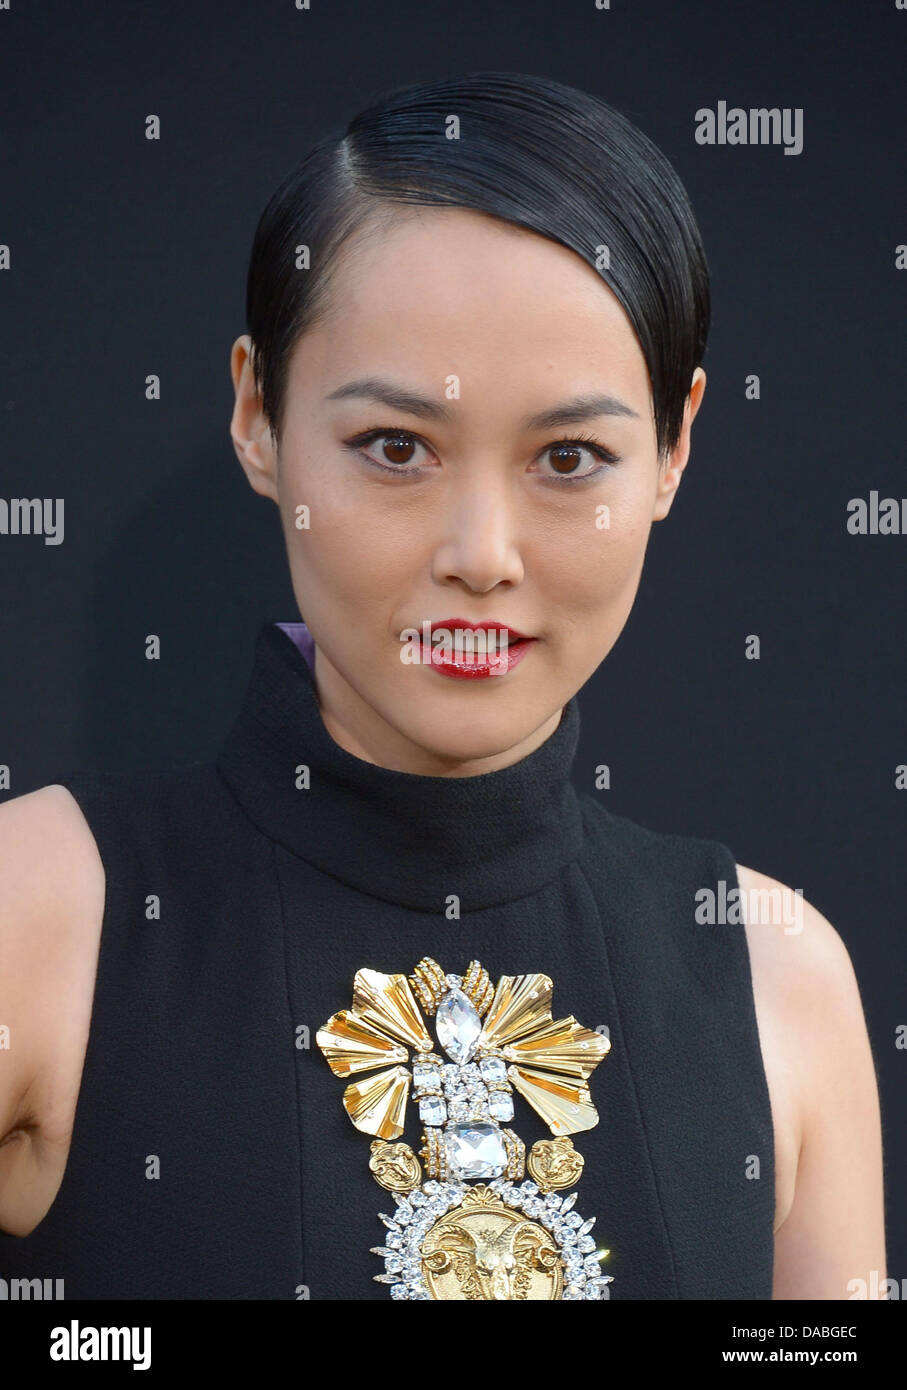 Hollywood, California, USA. 09th July, 2013. Rinko Kikuchi arrives at the Los Angeles film premiere for 'Pacific Rim' at the Dolby Theatre, Hollywood, California, USA. Credit:  Sydney Alford/Alamy Live News Stock Photo